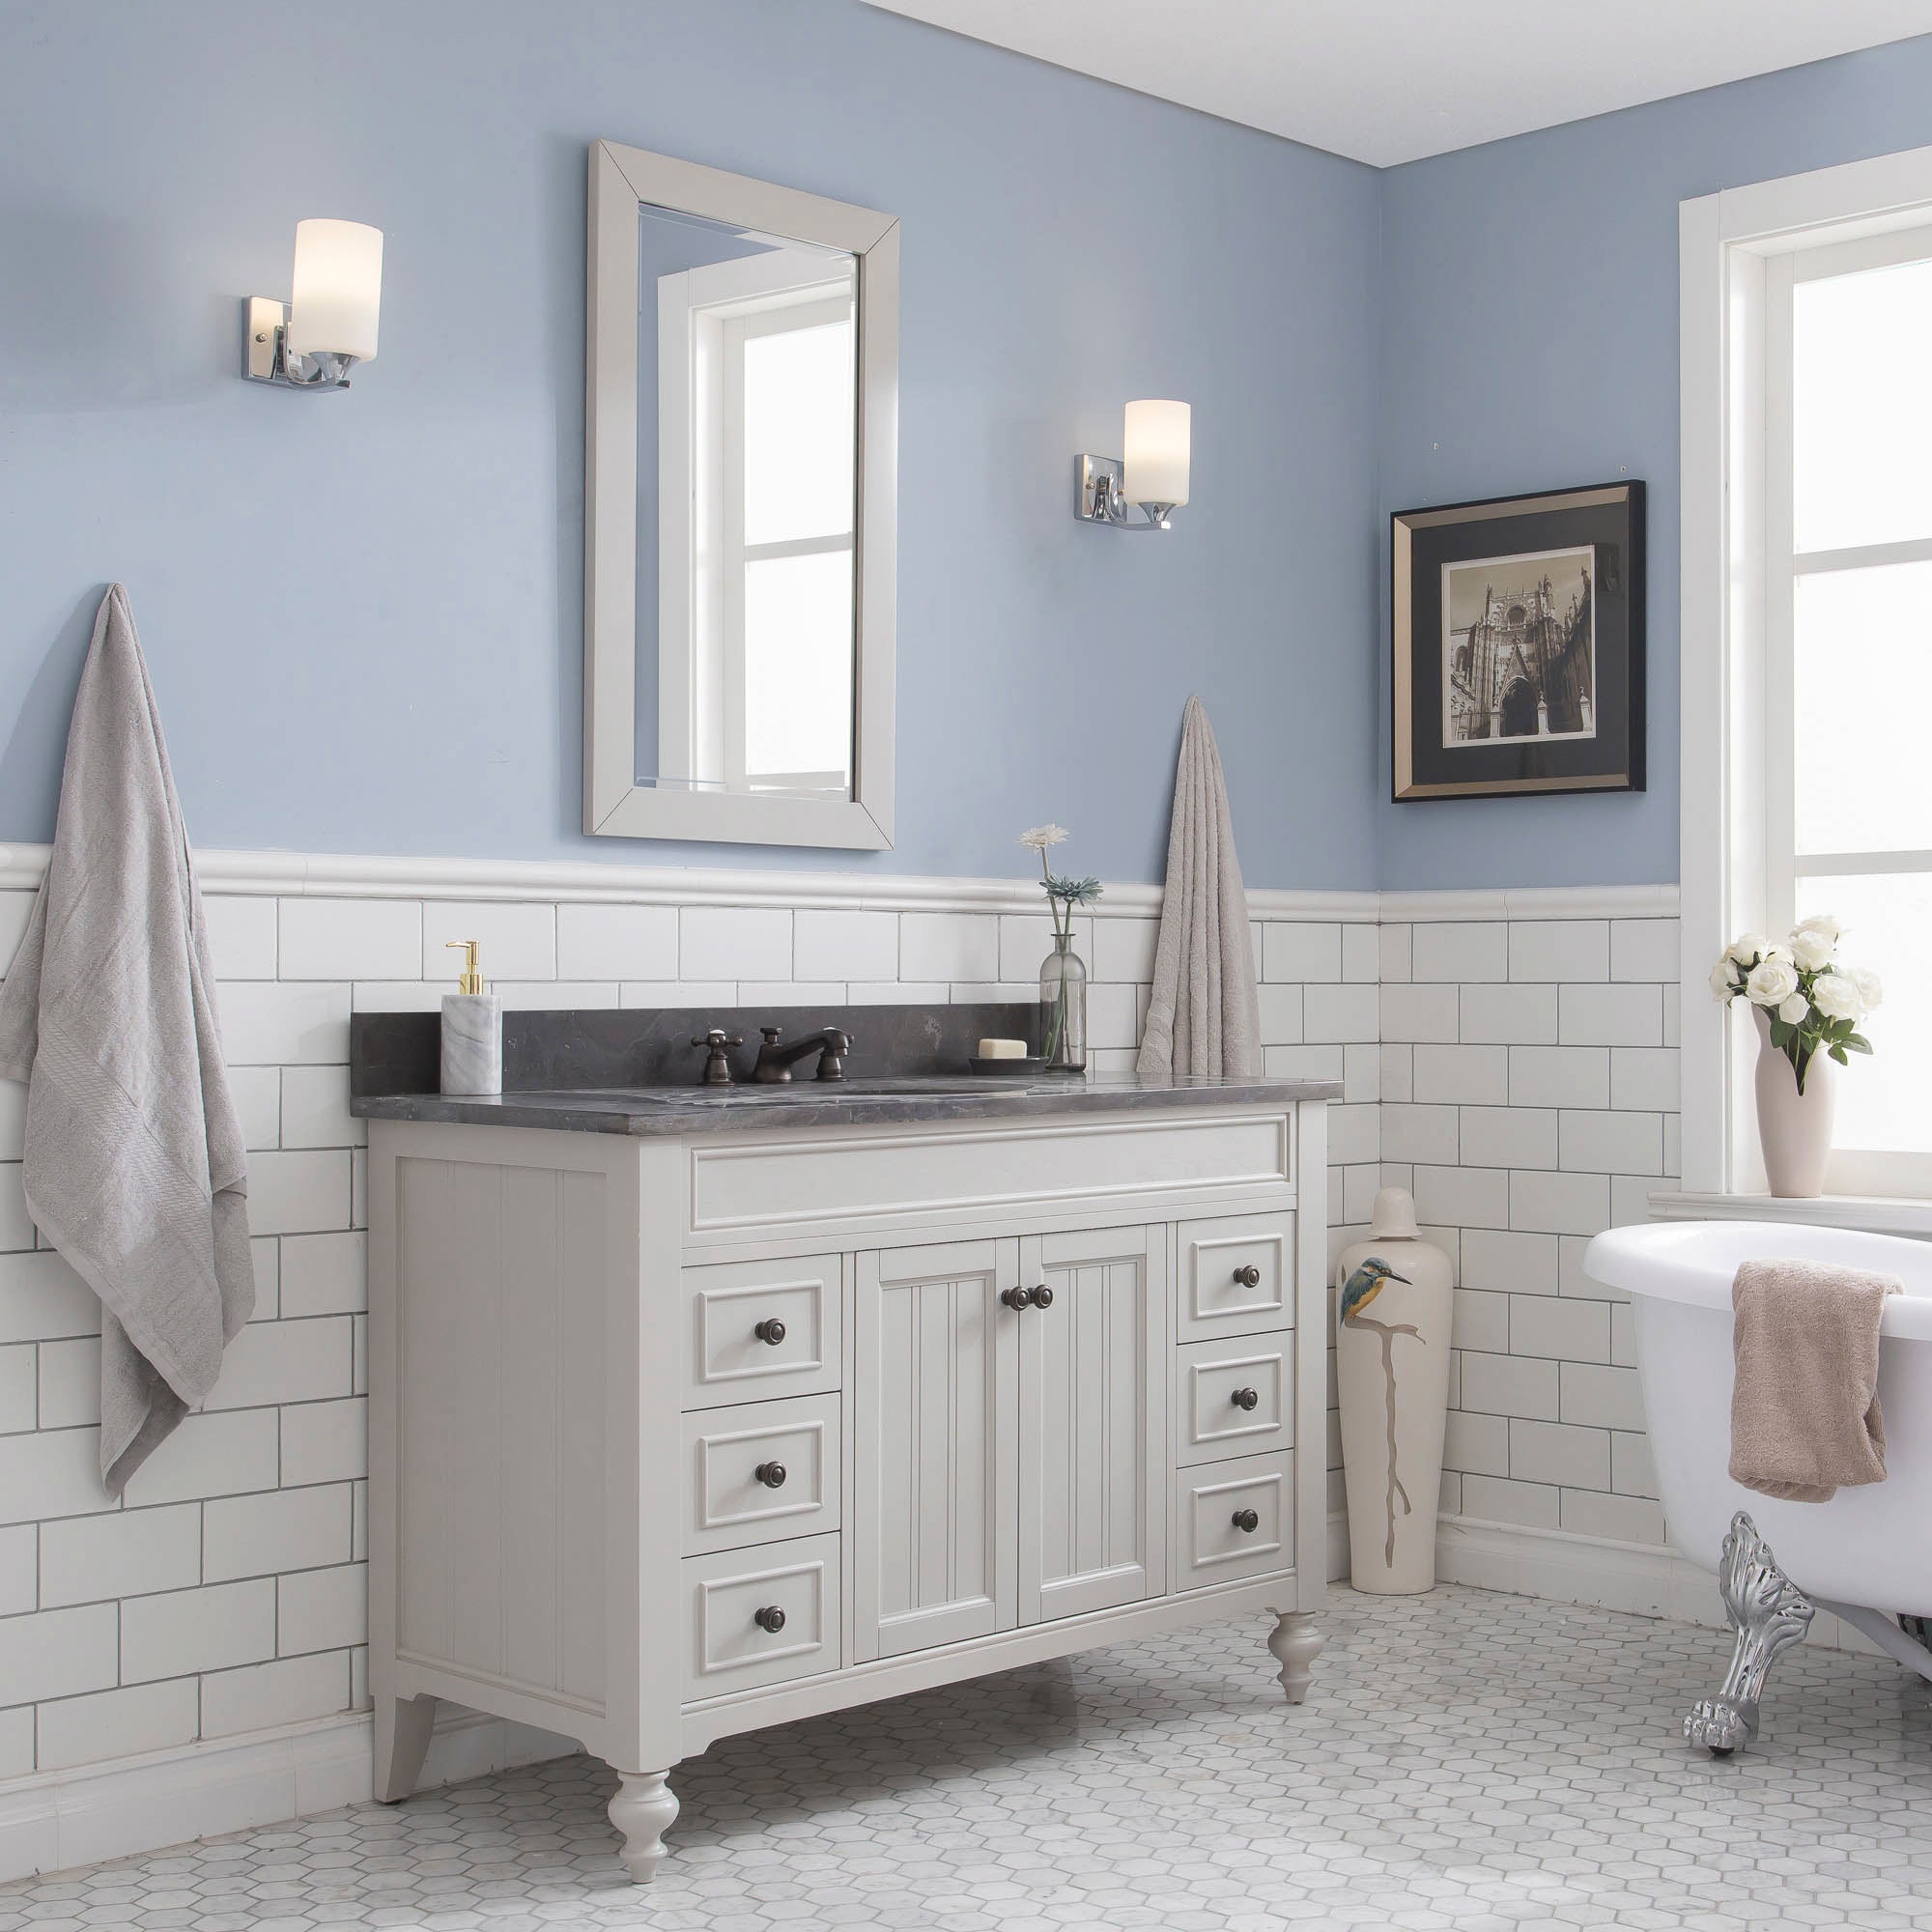 Water Creation | Potenza 48" Bathroom Vanity in Earl Grey with Blue Limestone Top with Faucet | PO48BL03EG-000BX0903